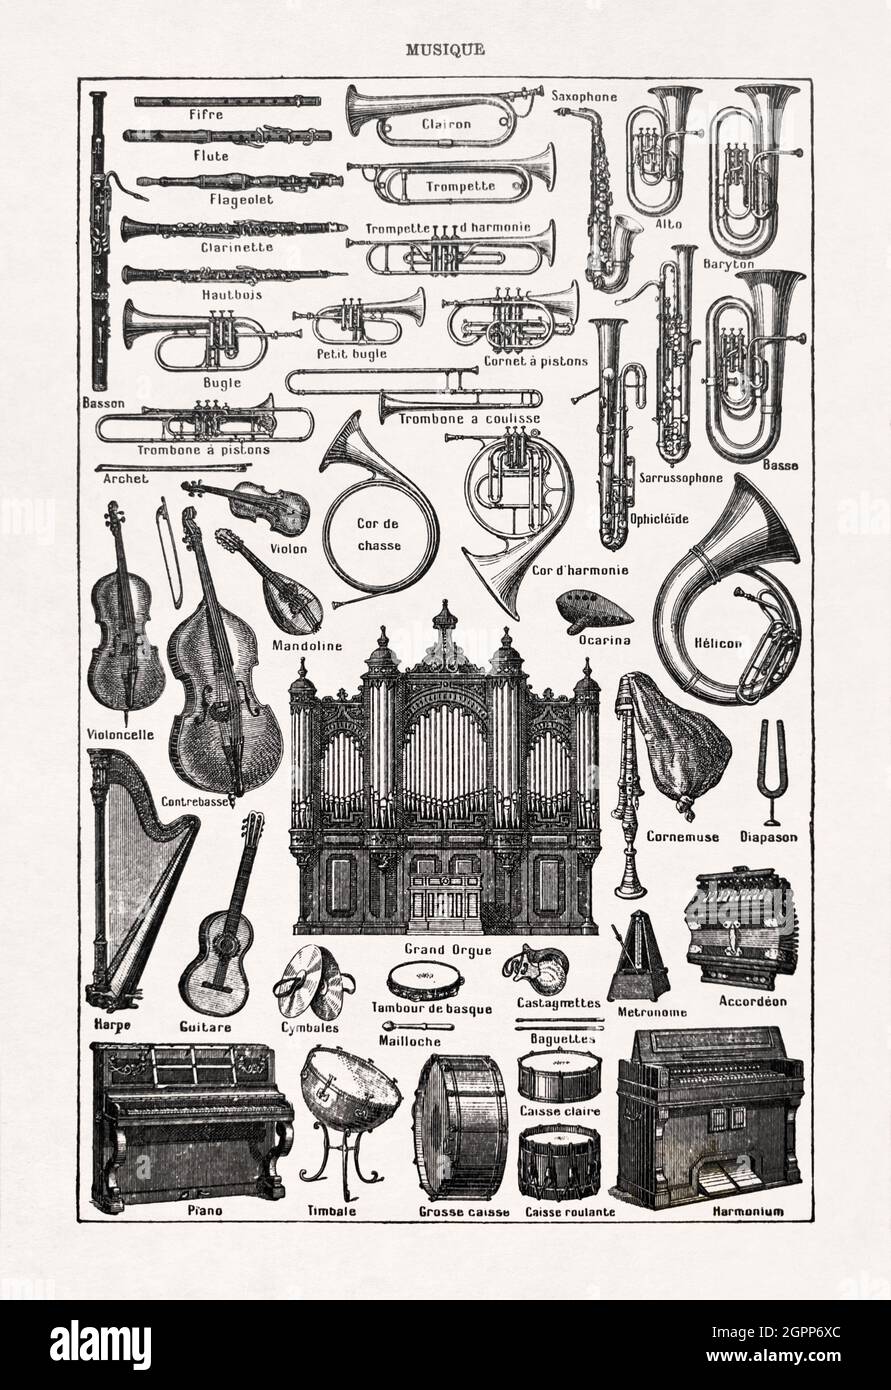 Old illustration about musical instruments printed in the french dictionary "Dictionnaire complet illustré" by the editor Larousse in 1899. Stock Photo